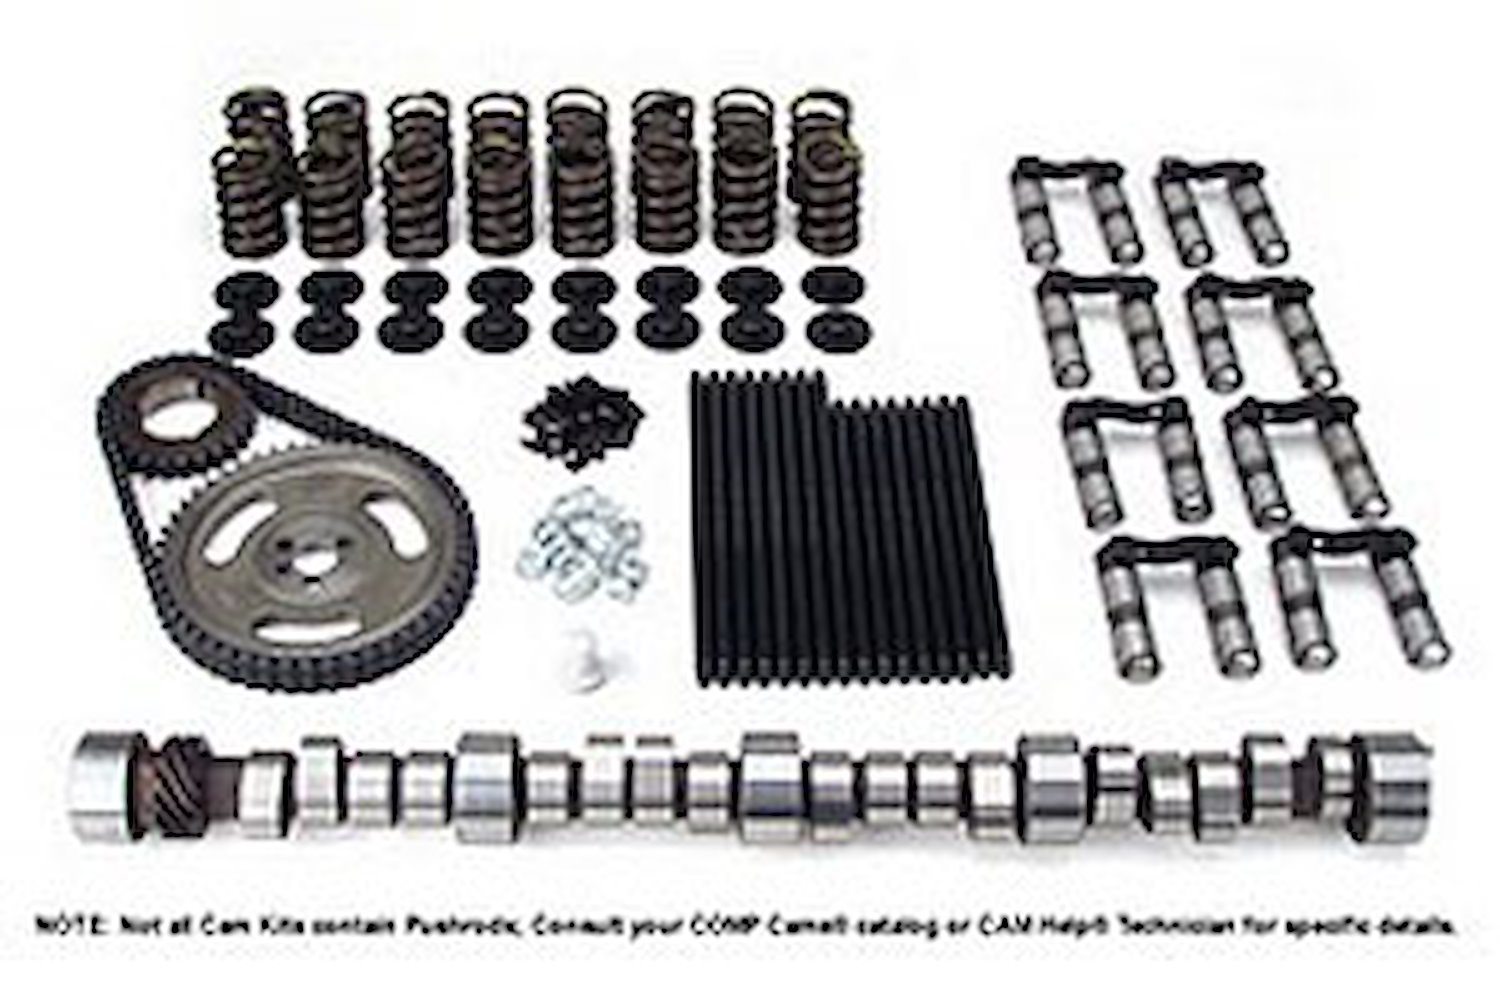 Xtreme Energy Mechanical Roller Camshaft Complete Kit Big Block Chevy 1965-96 Lift: .639"/.646"